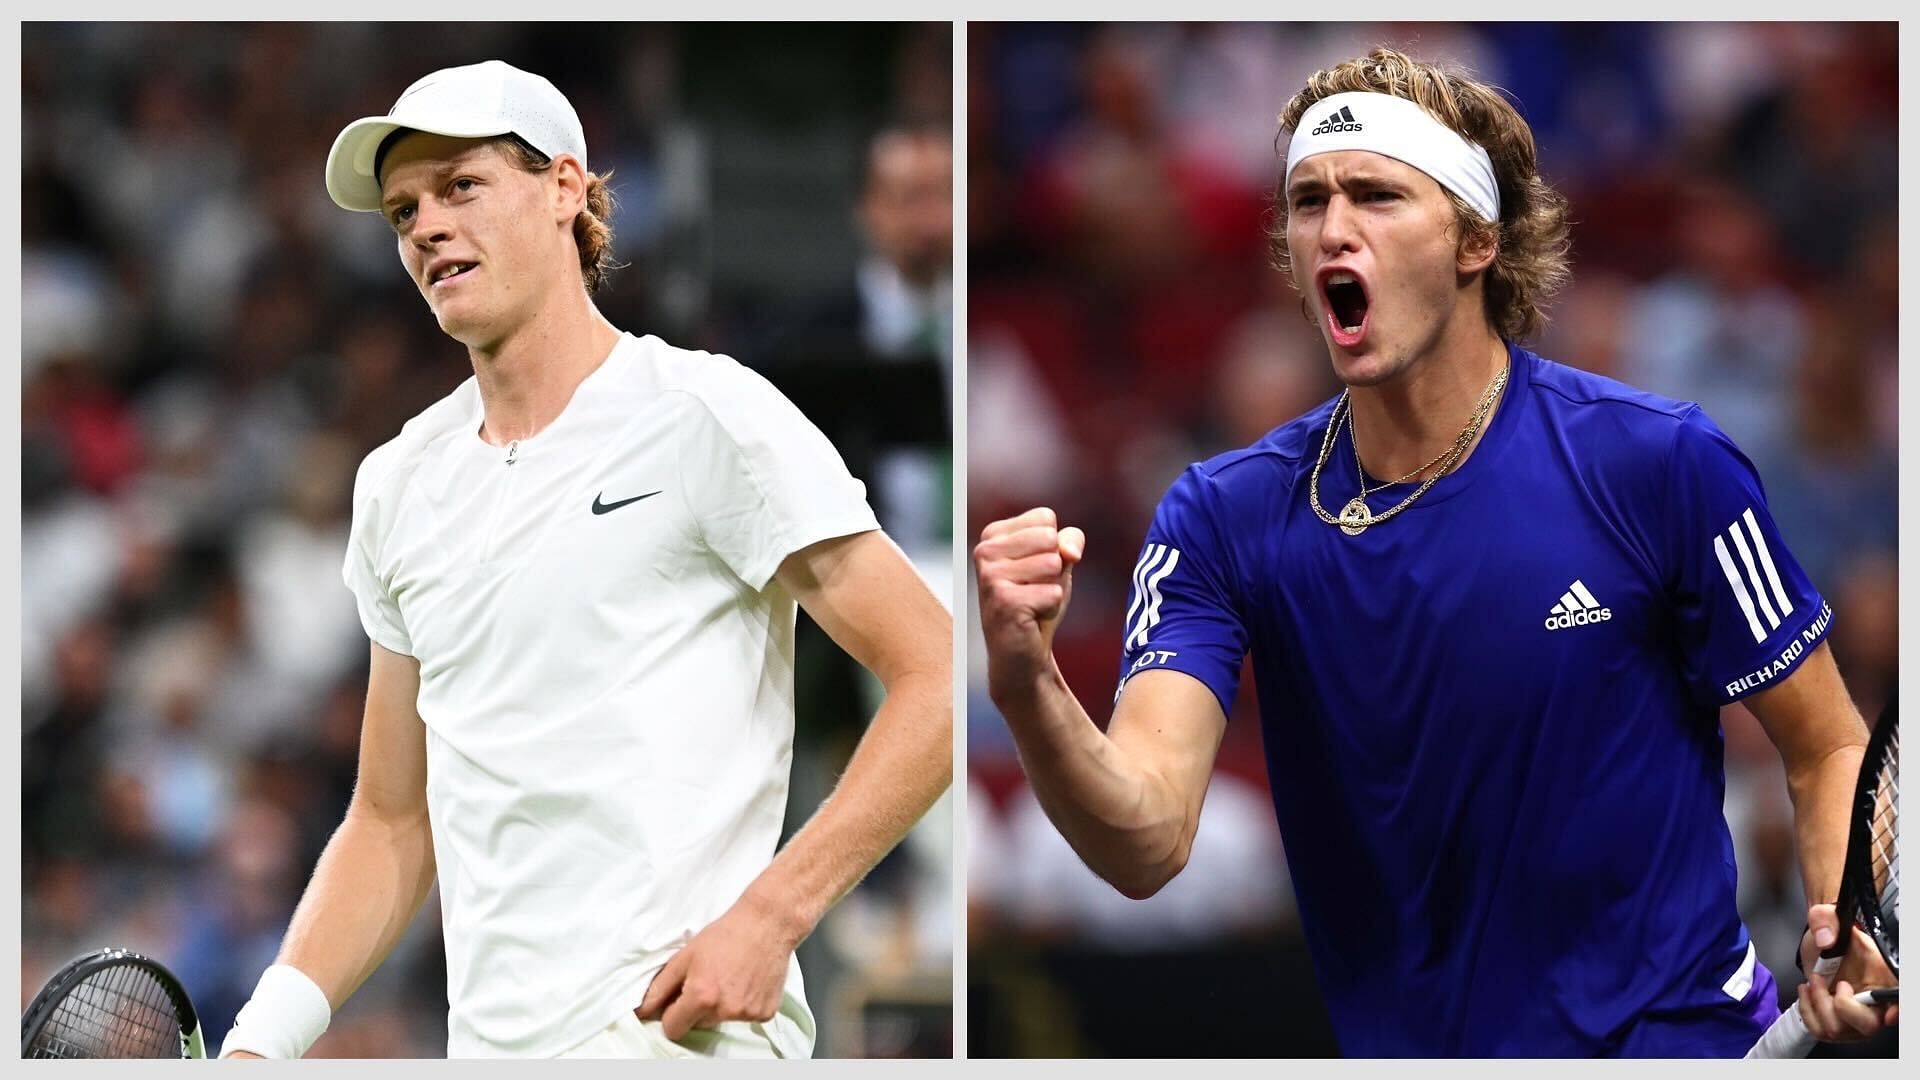 Just in: Sinner commands the Race with Alcaraz and Zverev chasing